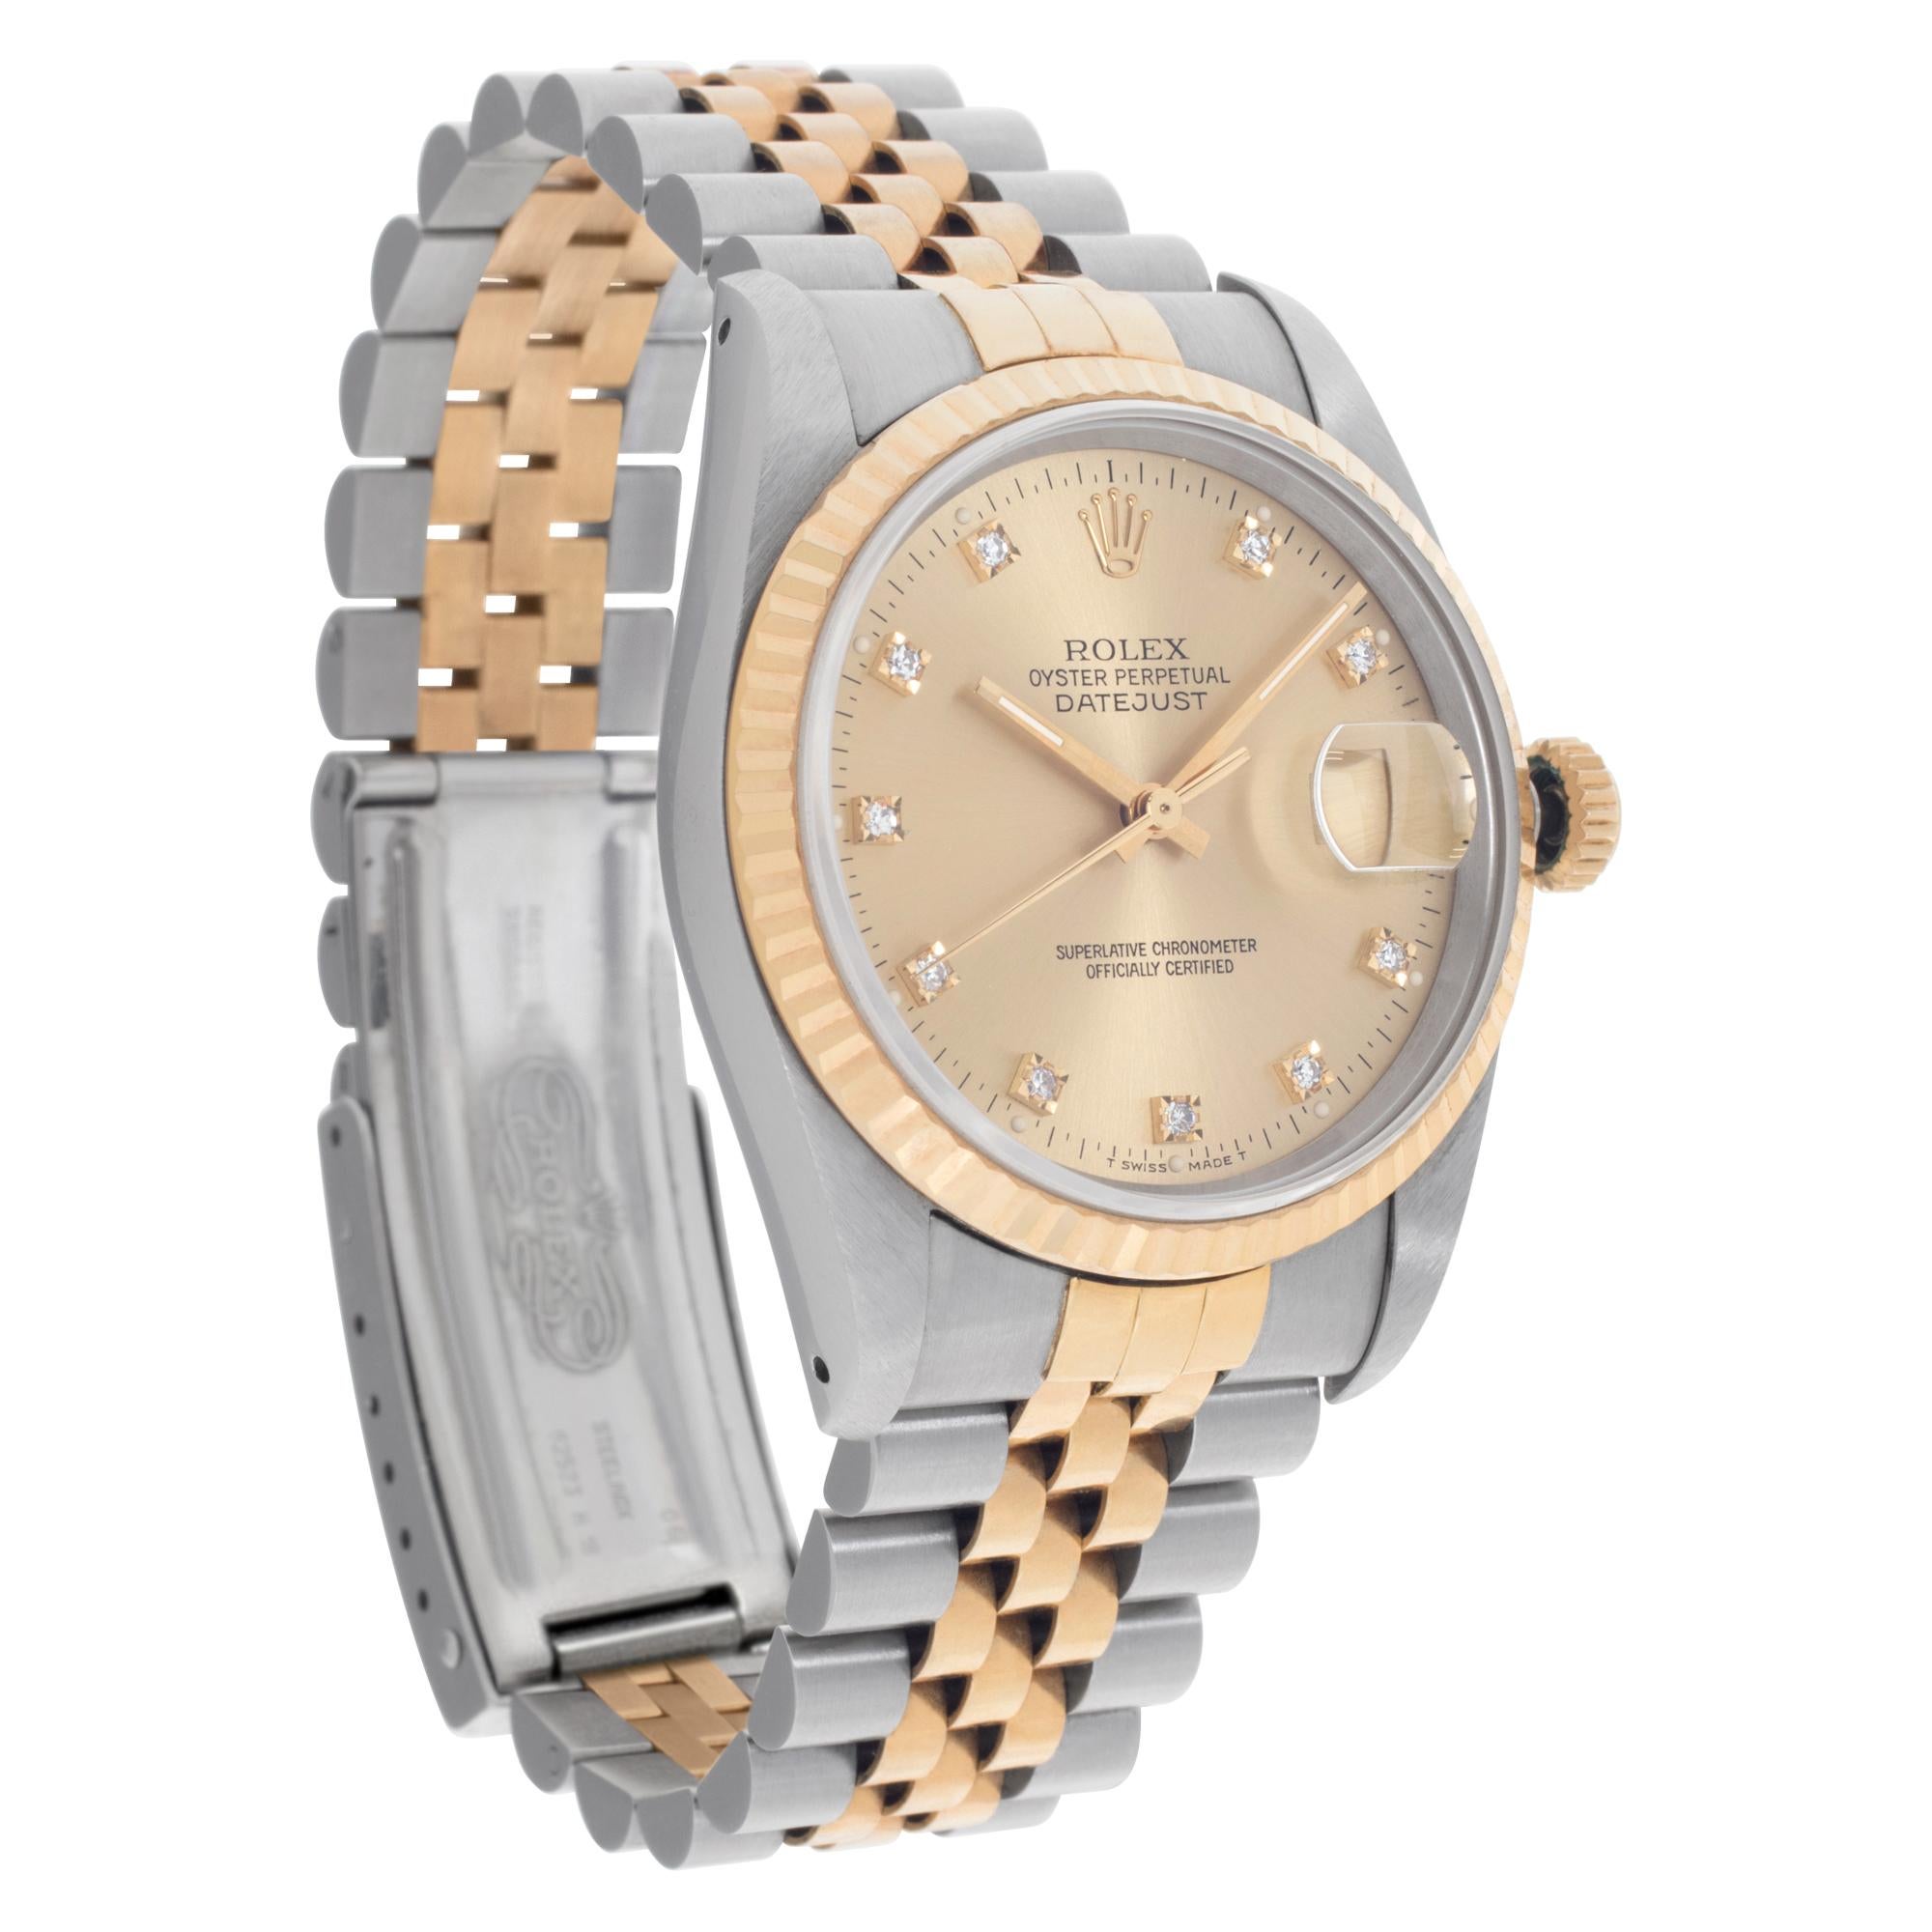 Rolex Datejust 16233 in yellow gold & steel 36mm Automatic watch In Excellent Condition For Sale In Surfside, FL